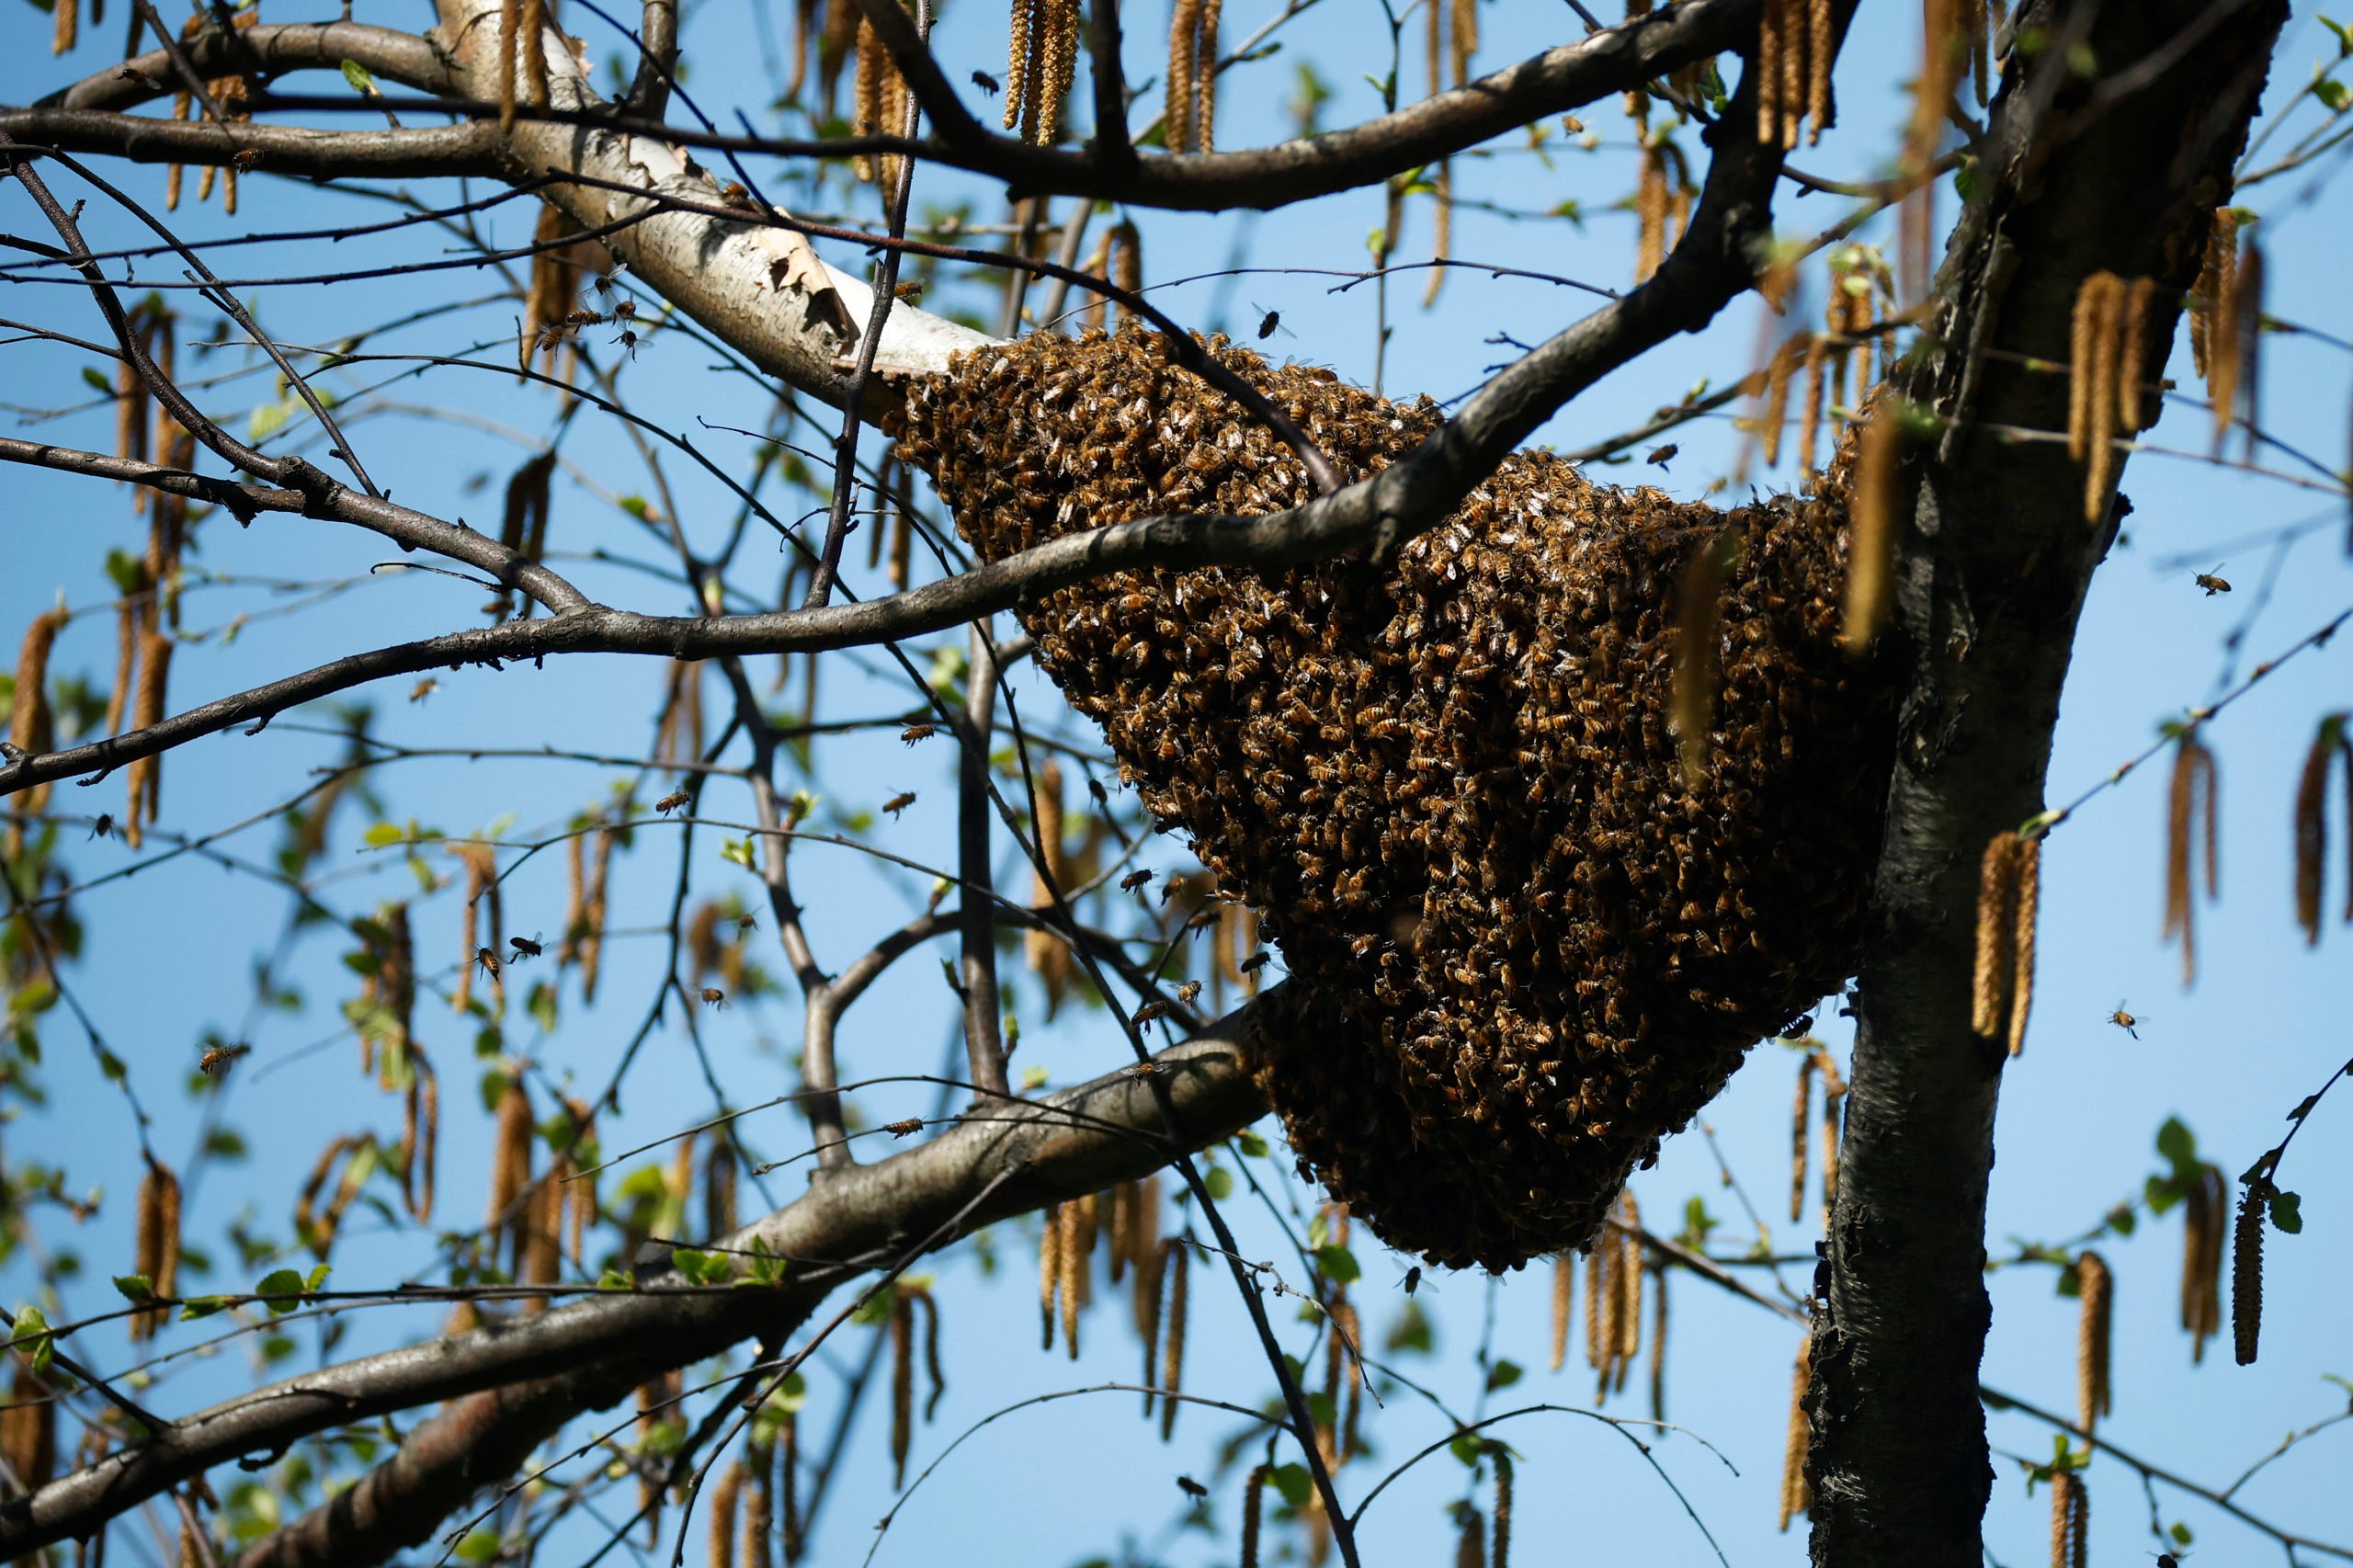 WASHINGTON, DC - APRIL 08: Thousands of bees cluster on a tree branch as they swarm outside of the U.S. Agriculture Department headquarters on the National Mall on April 08, 2024 in Washington, DC. When a new queen bee arrives in a colony and the hive becomes crowded, a portion of the population will leave with the old queen, creating a swarm. The swarm will cluster on the branch while scout bees look for a location to begin a new hive. (Photo by Chip Somodevilla/Getty Images)